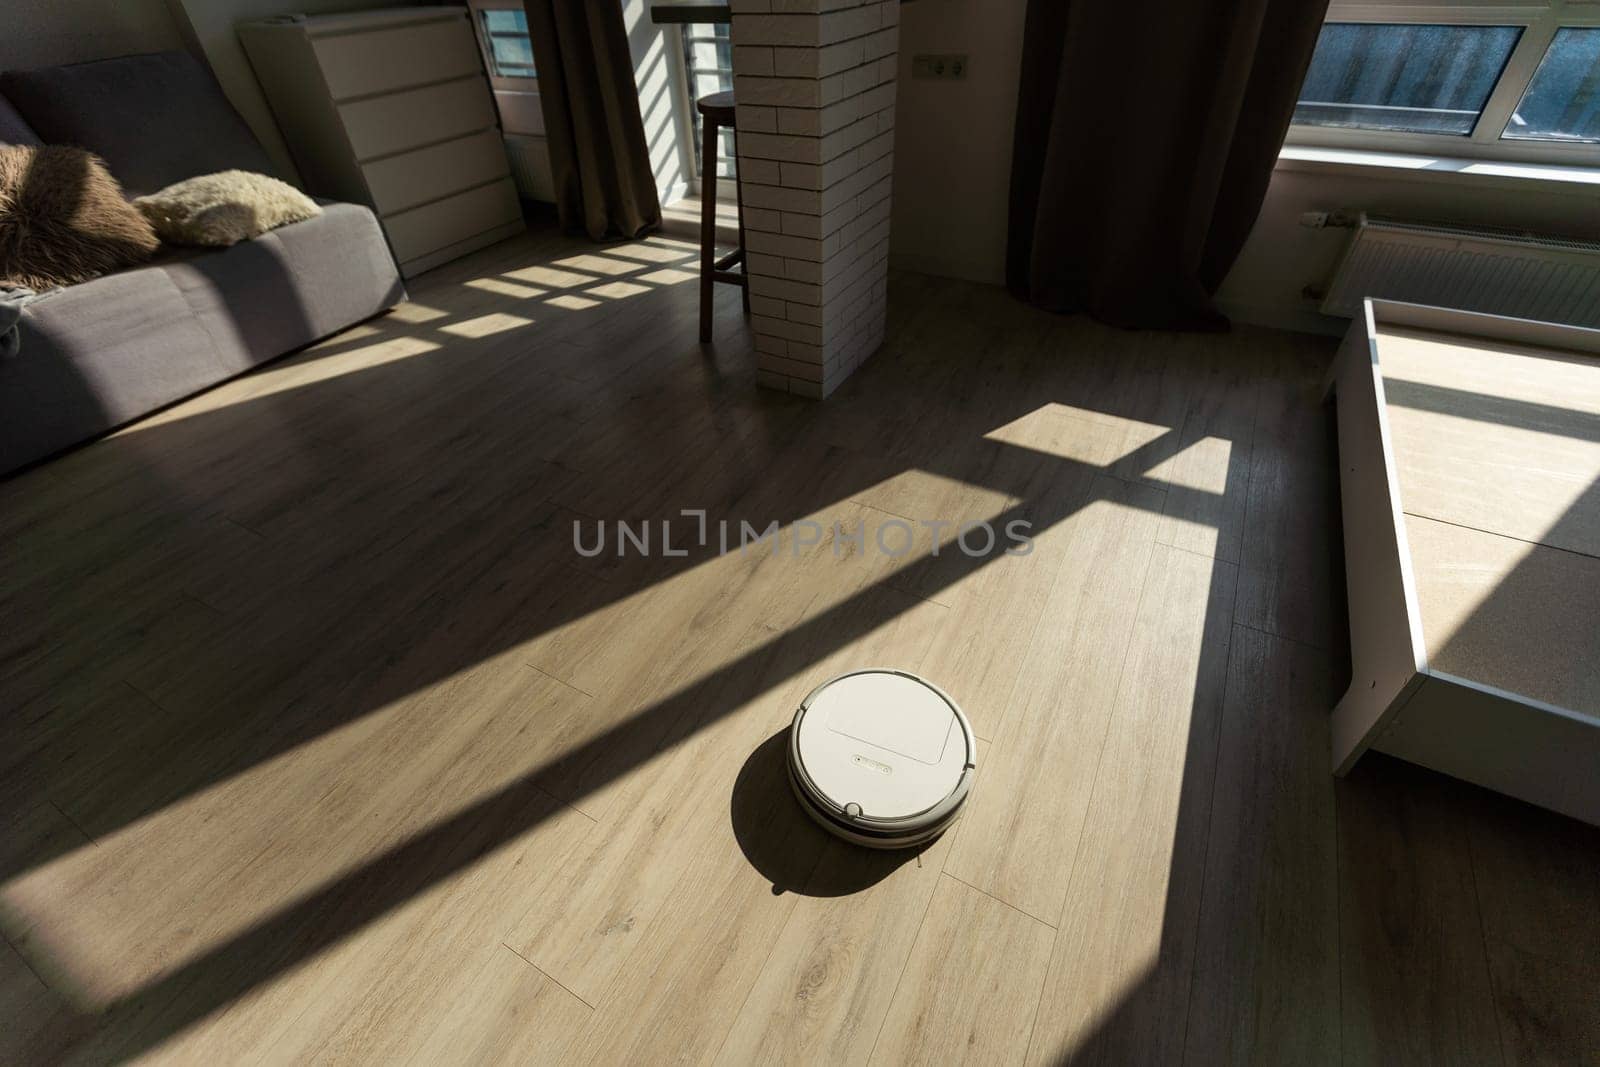 Robot vacuum cleaner on hardwood floor at sunny day by Andelov13